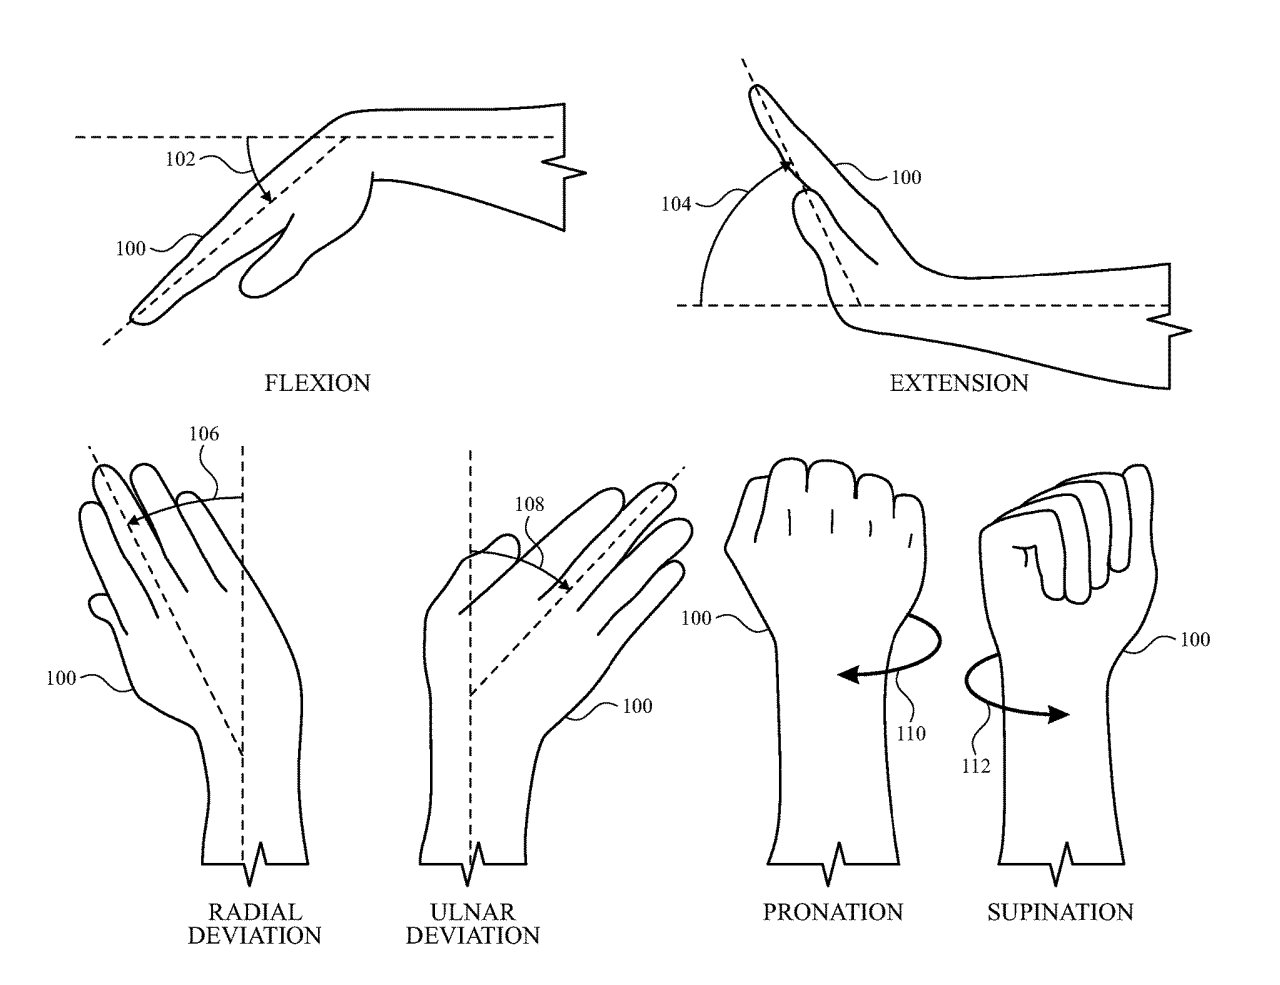 Detail from the patent showing different hand and arm gestures that could be detected